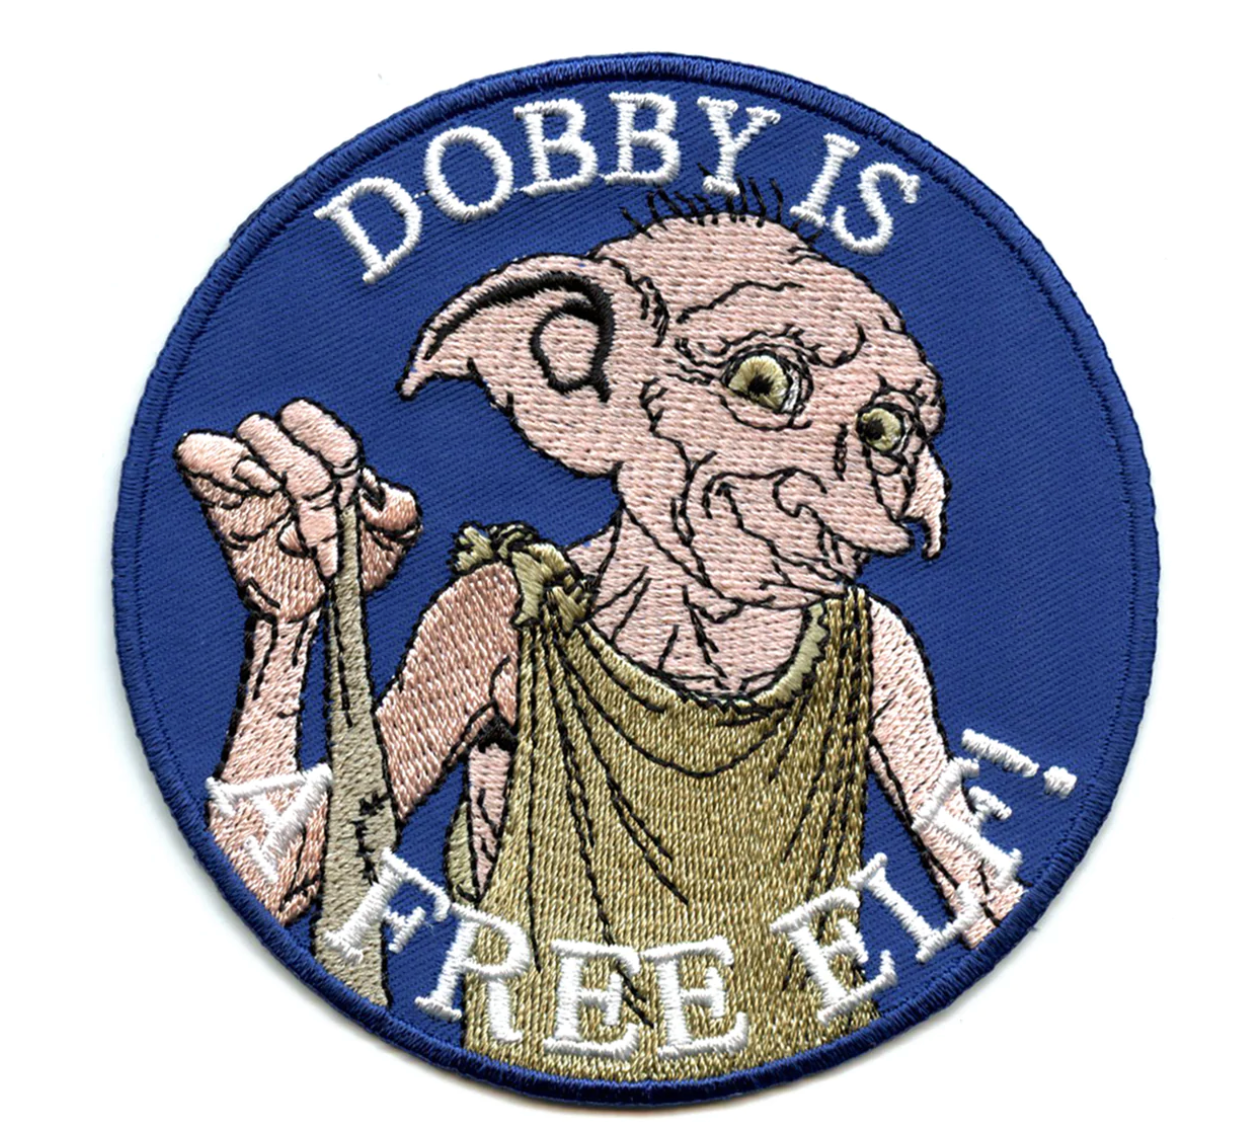 Harry Potter Dobby is Free Patch